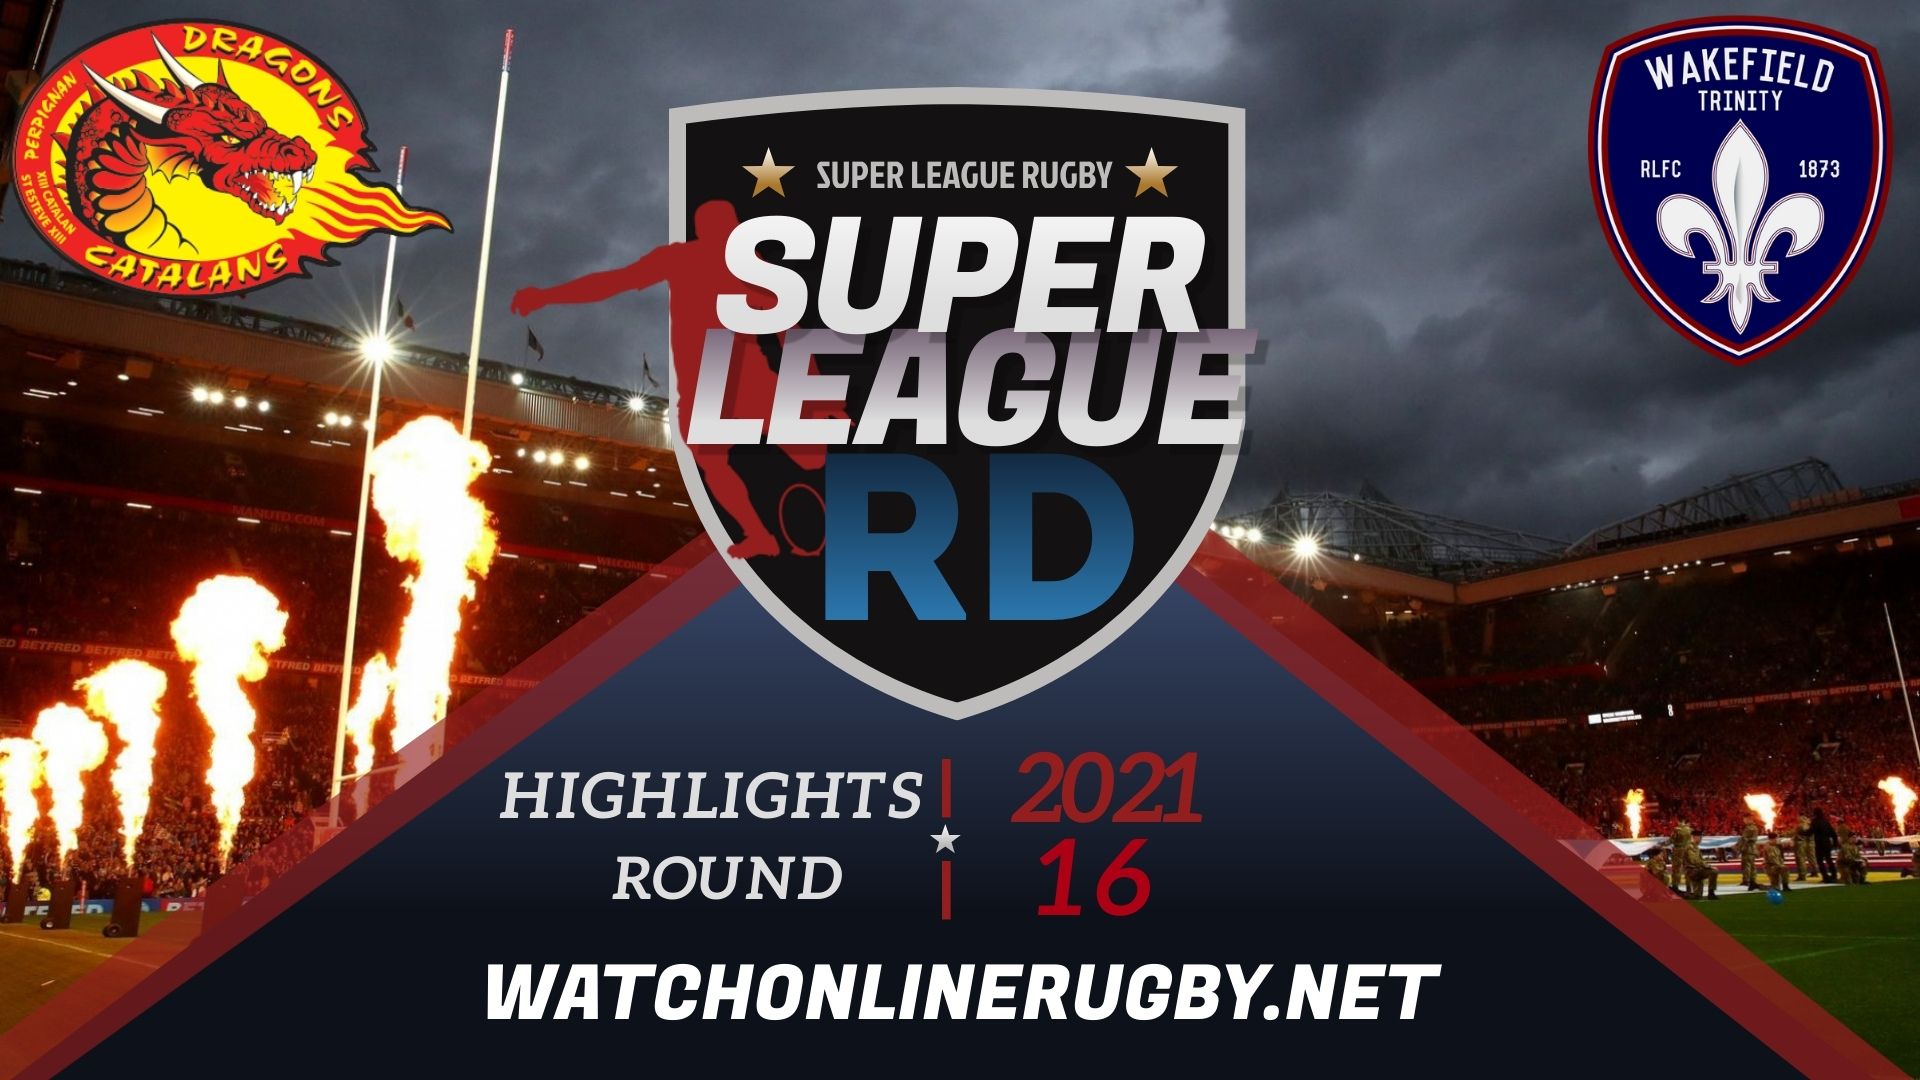 Catalans Dragons Vs Wakefield Trinity Super League Rugby 2021 RD 16